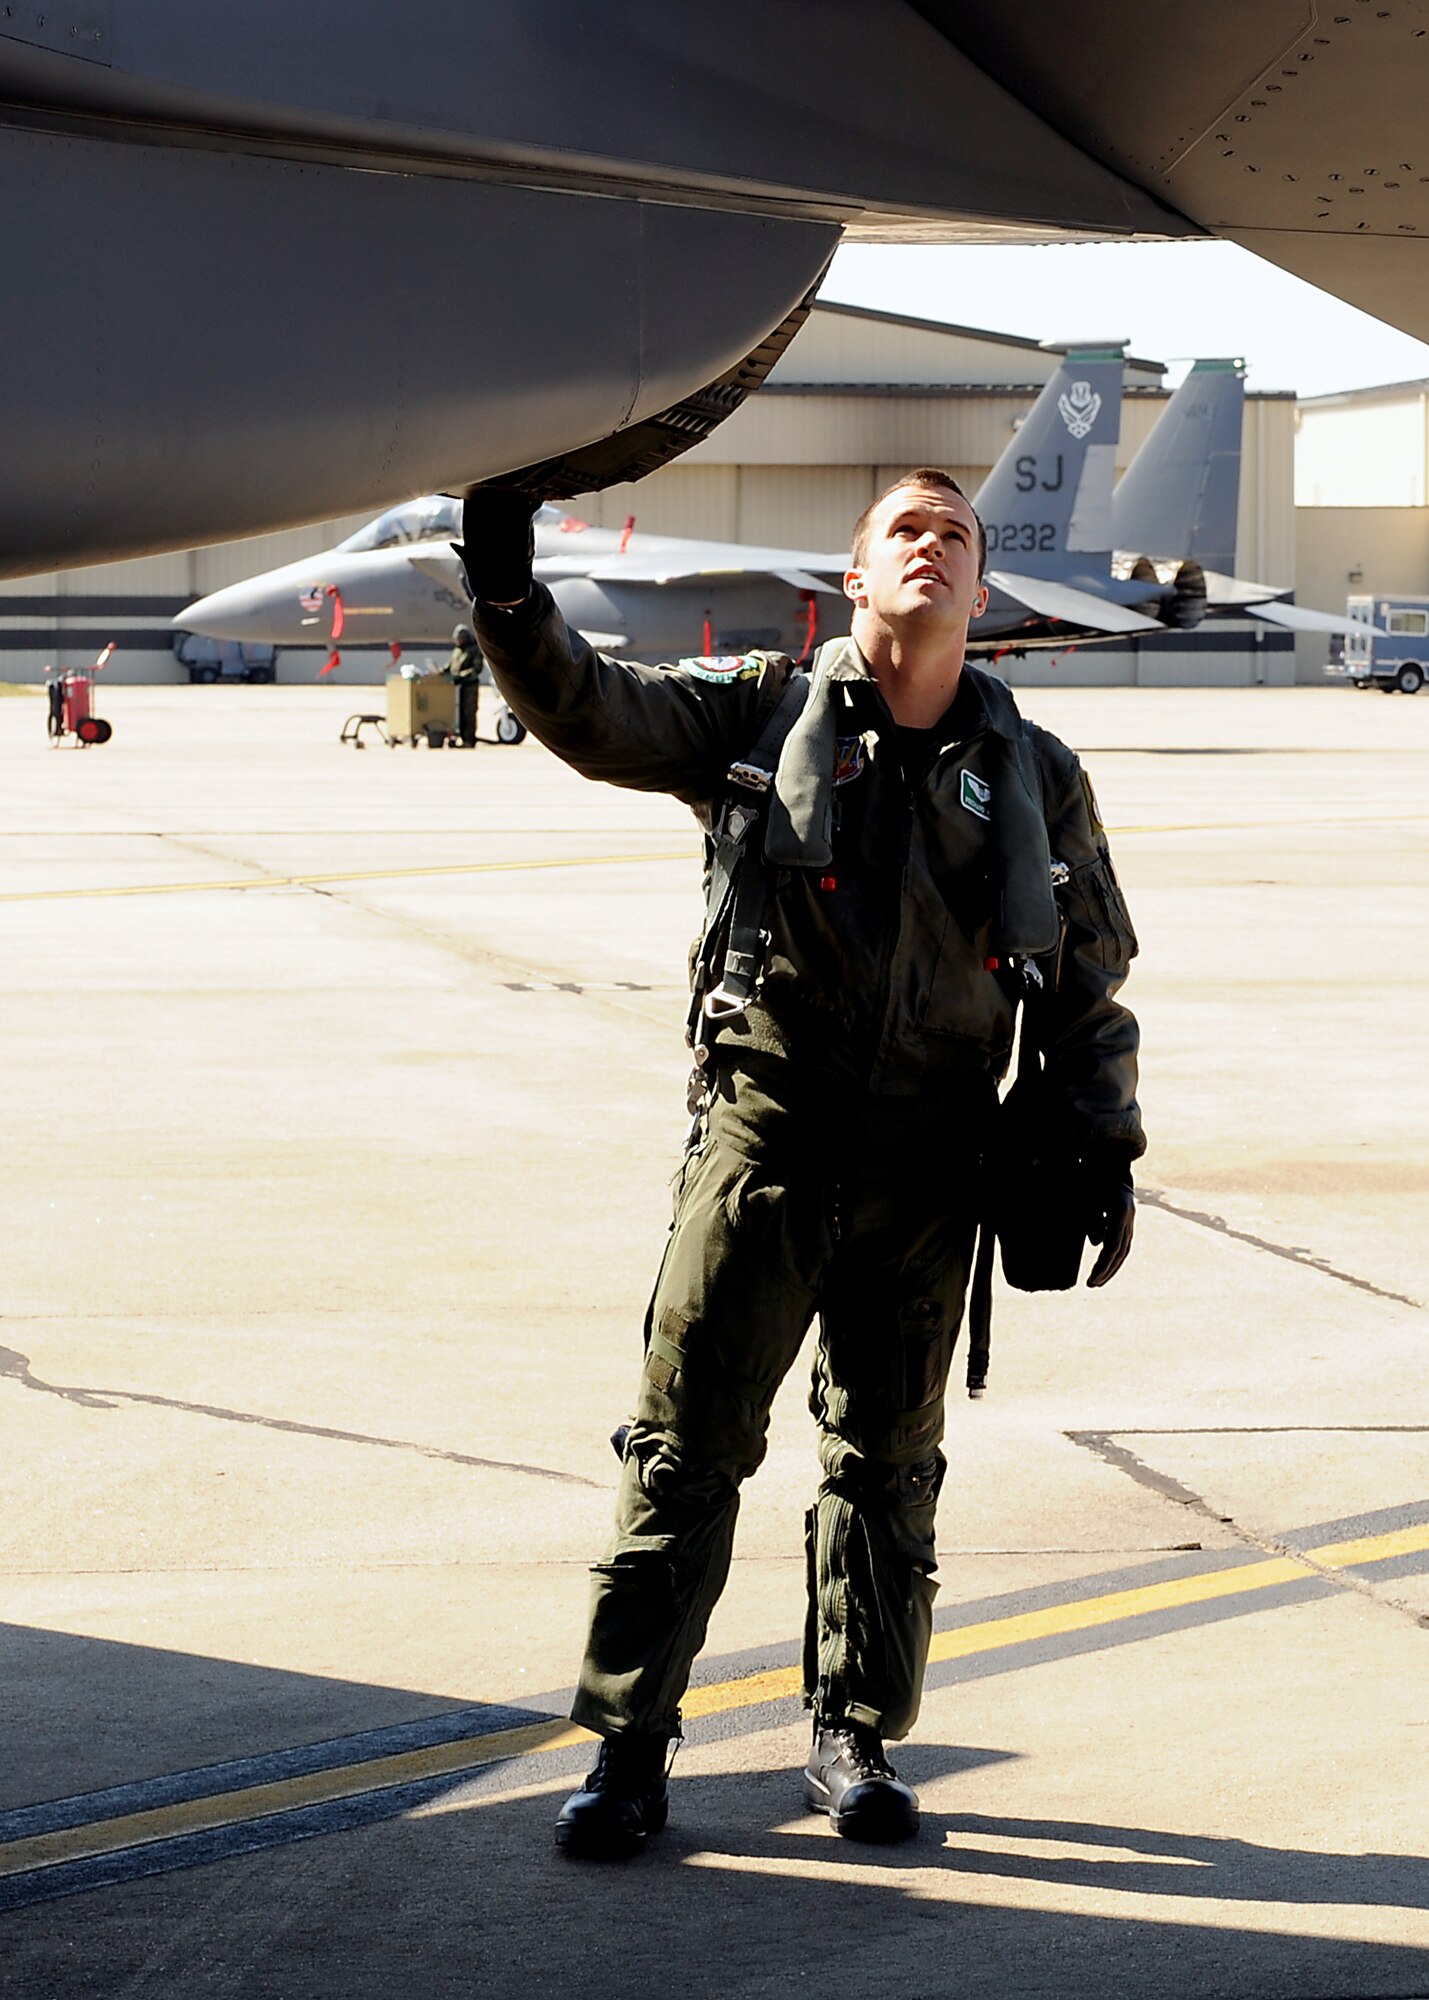 Captain Prichard Keely, 335th Fighter Squadron weapons systems officer, checks over his F-15E Strike Eagle before he takes off from Seymour Johnson Air Force Base, N.C., Feb. 23, 2009. In April 2008, Captain Keely and aircrew from the 335th FS provided close-air support for ground forces during a massive firefight in Shok Valley, Afghanistan. The 335th FS was deployed in support of Operation Enduring Freedom. (U.S. Air Force Photo by Airman 1st Class Gino Reyes)